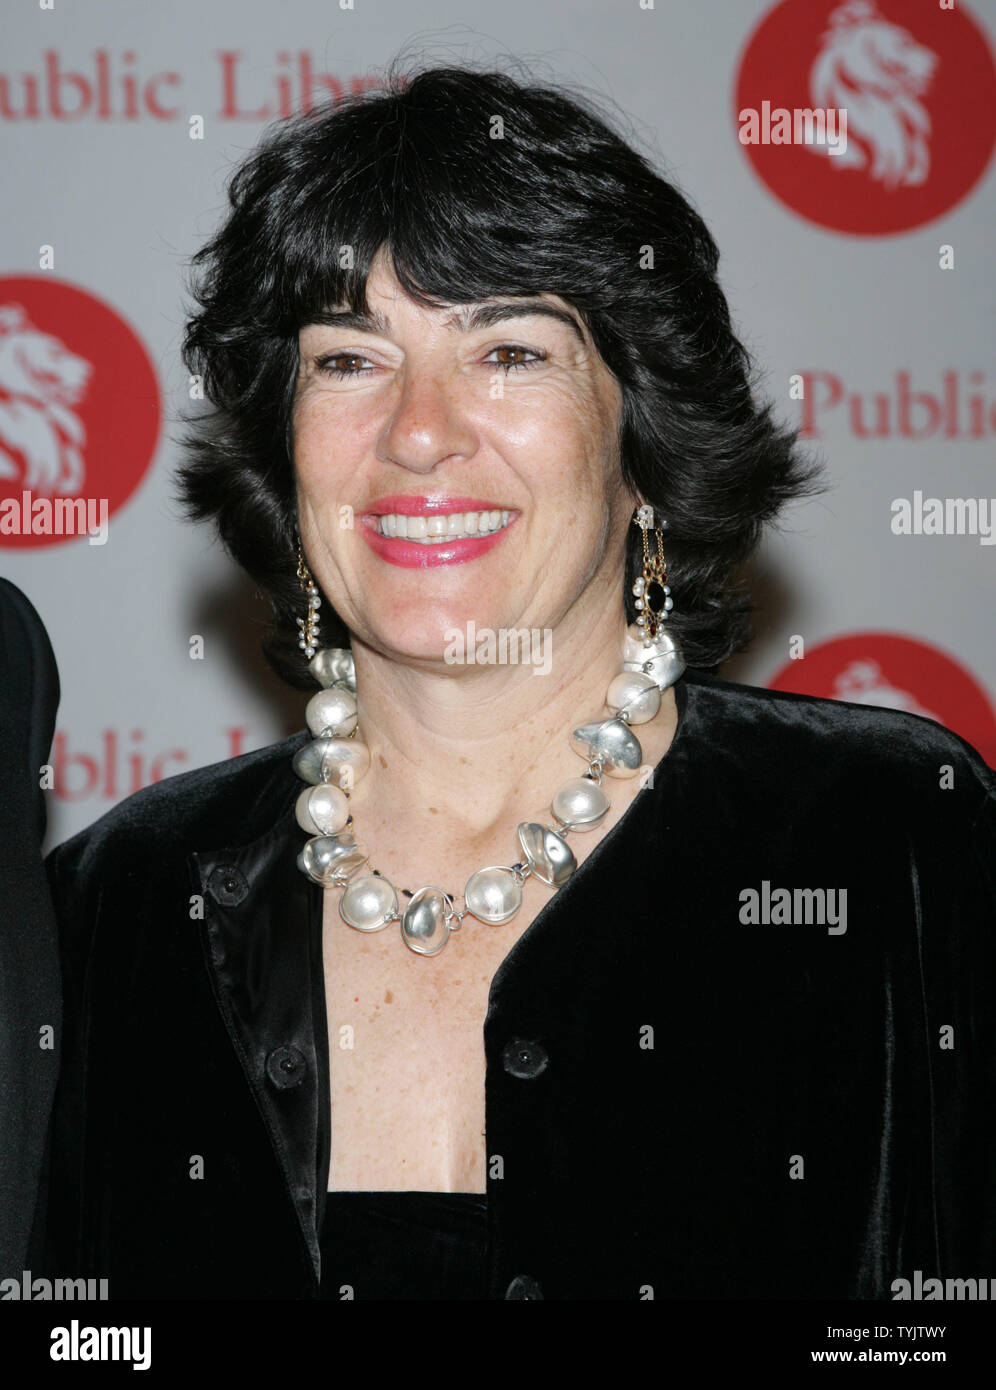 Christiane Amanpour arrives at the 2008 Library Lions Benefit at the New York Public Library in New York on November 3, 2008.  (UPI Photo/Laura Cavanaugh) Stock Photo